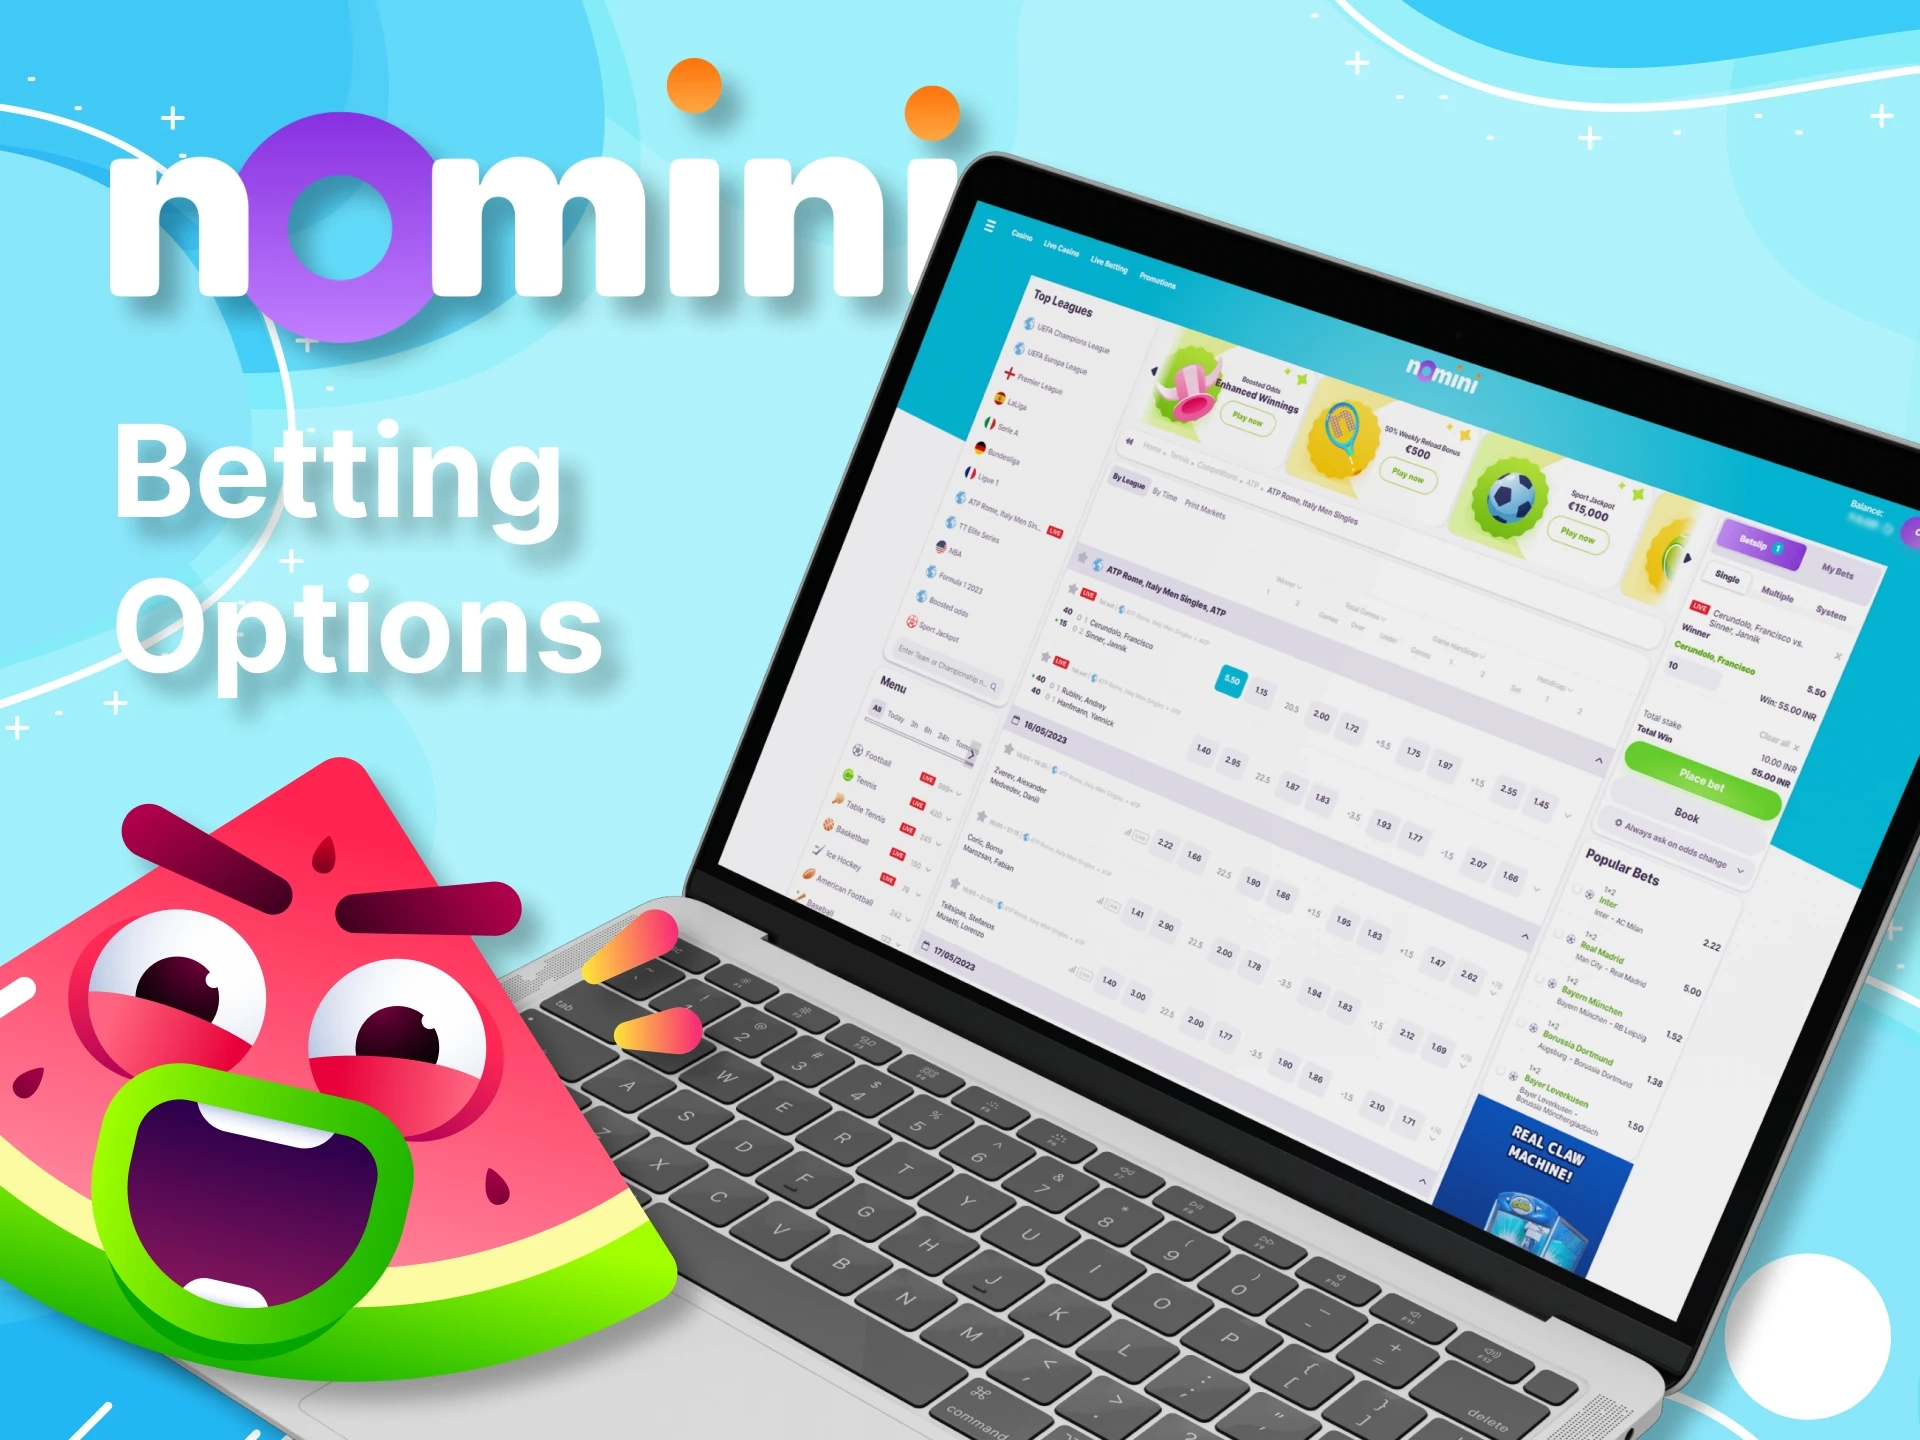 Try the different options for sports betting at Nomini.